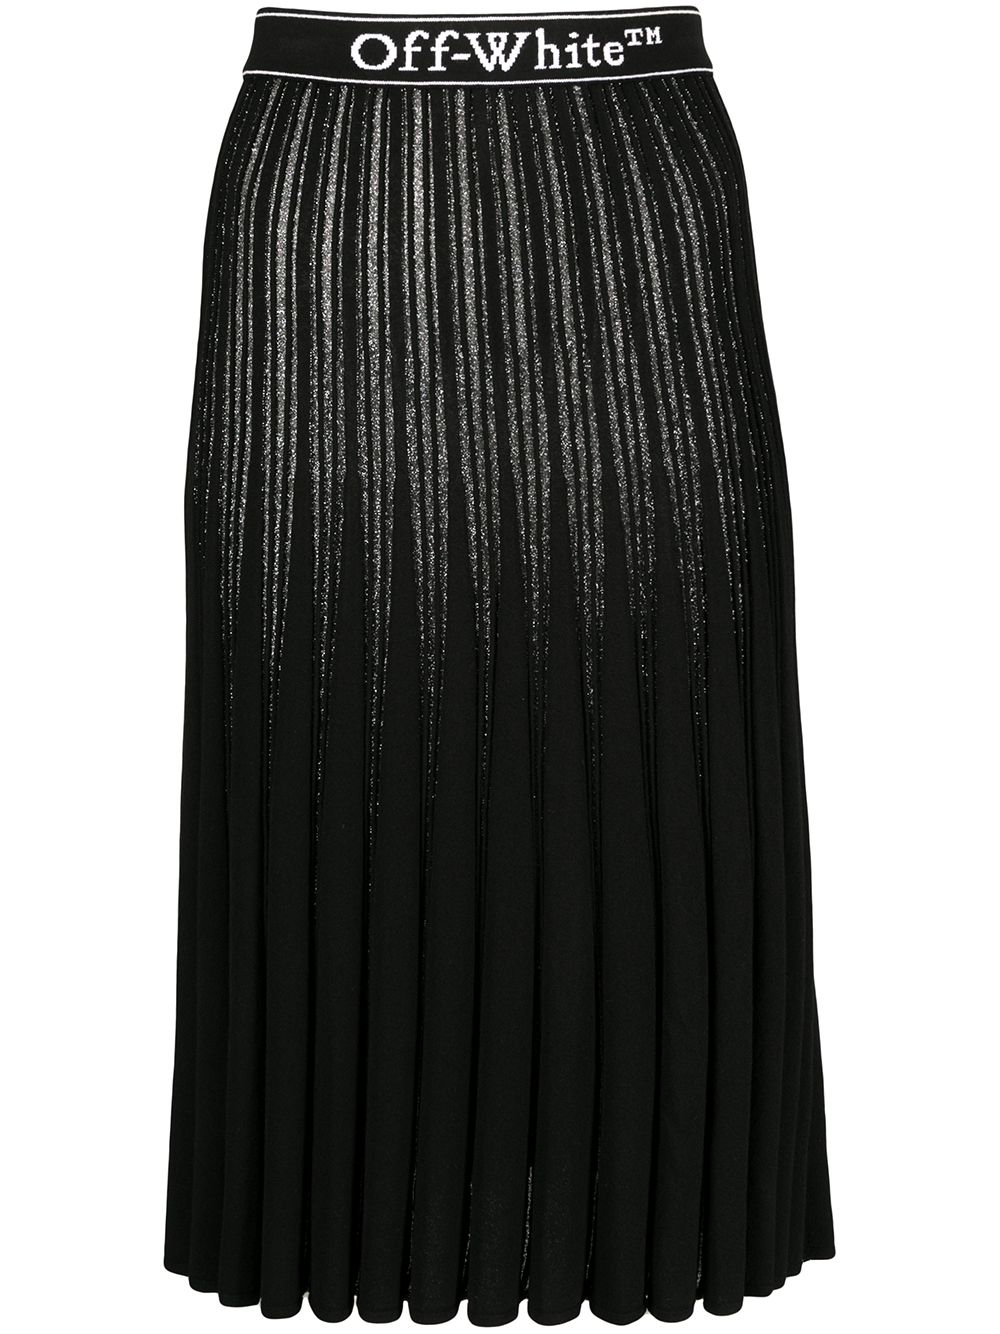 Off-White Metallic Knitted Pleated Skirt - Farfetch